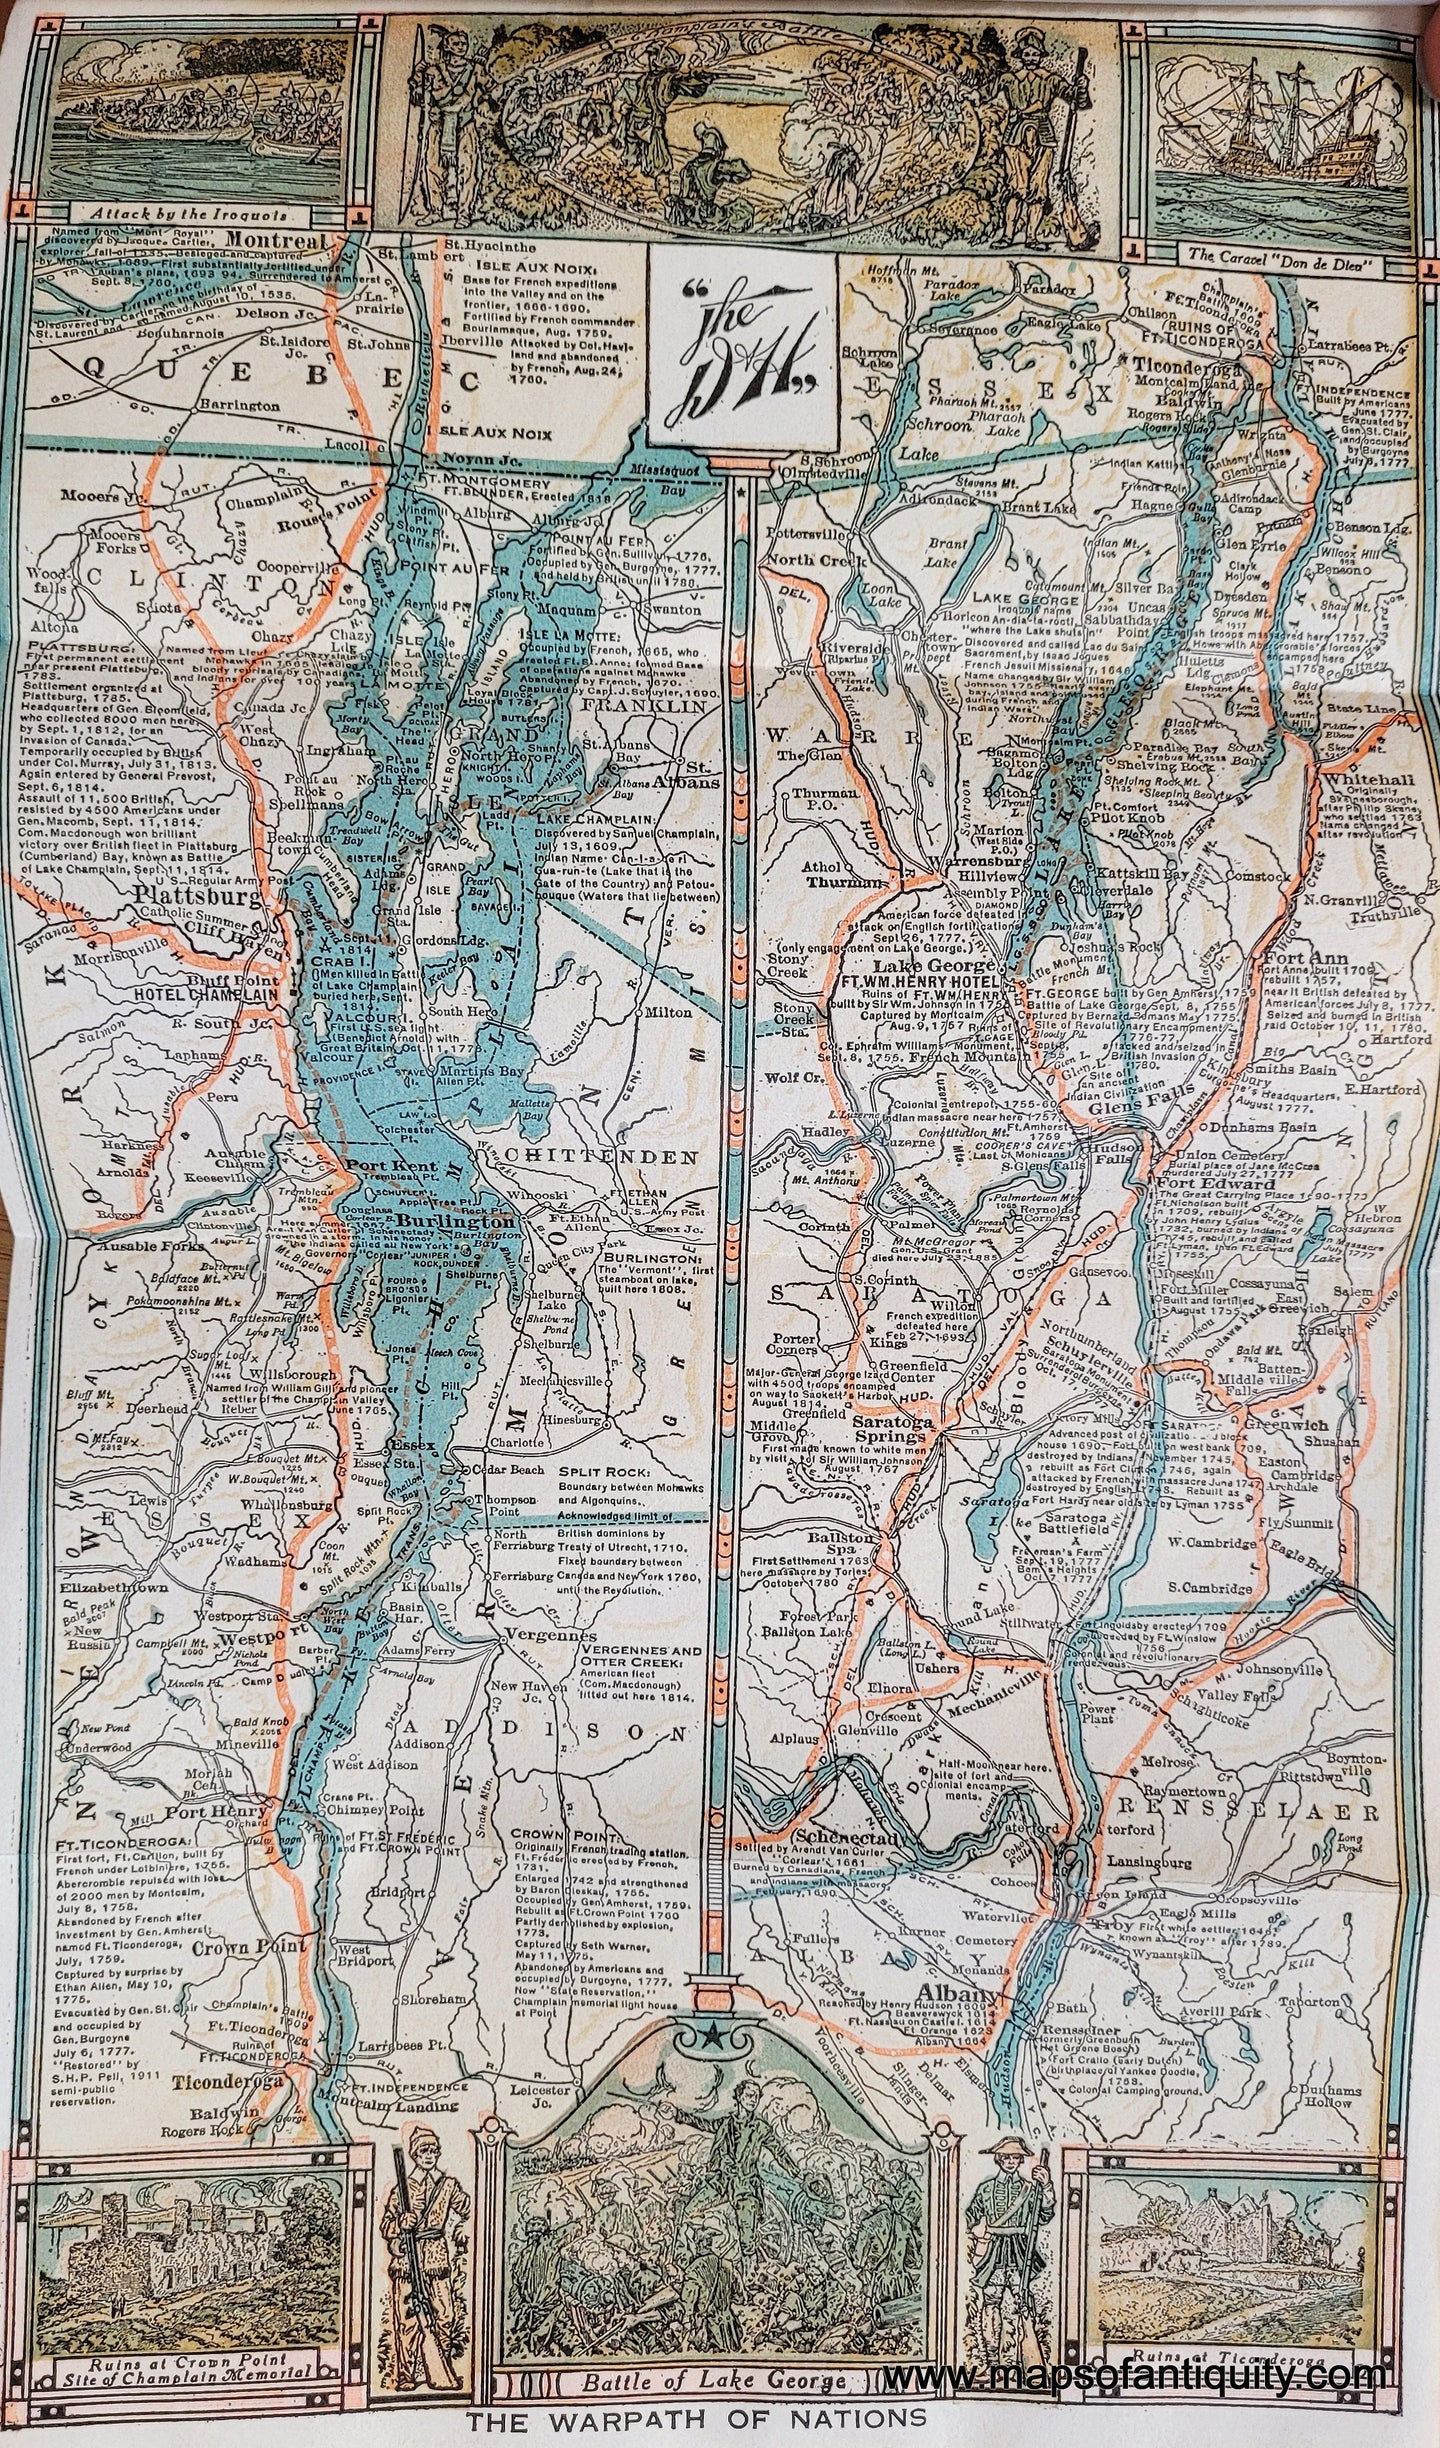 Genuine-Antique-Printed-Color-Folding-Map-in-Book-A-Summer-Paradise.-Lake-George-Lake-Champlain-the-Adirondacks-and-Summer-Resorts-on-the-Lines-of-the-Delaware-Hudson-Co.-1922-Delaware-Hudson-Co.-Maps-Of-Antiquity